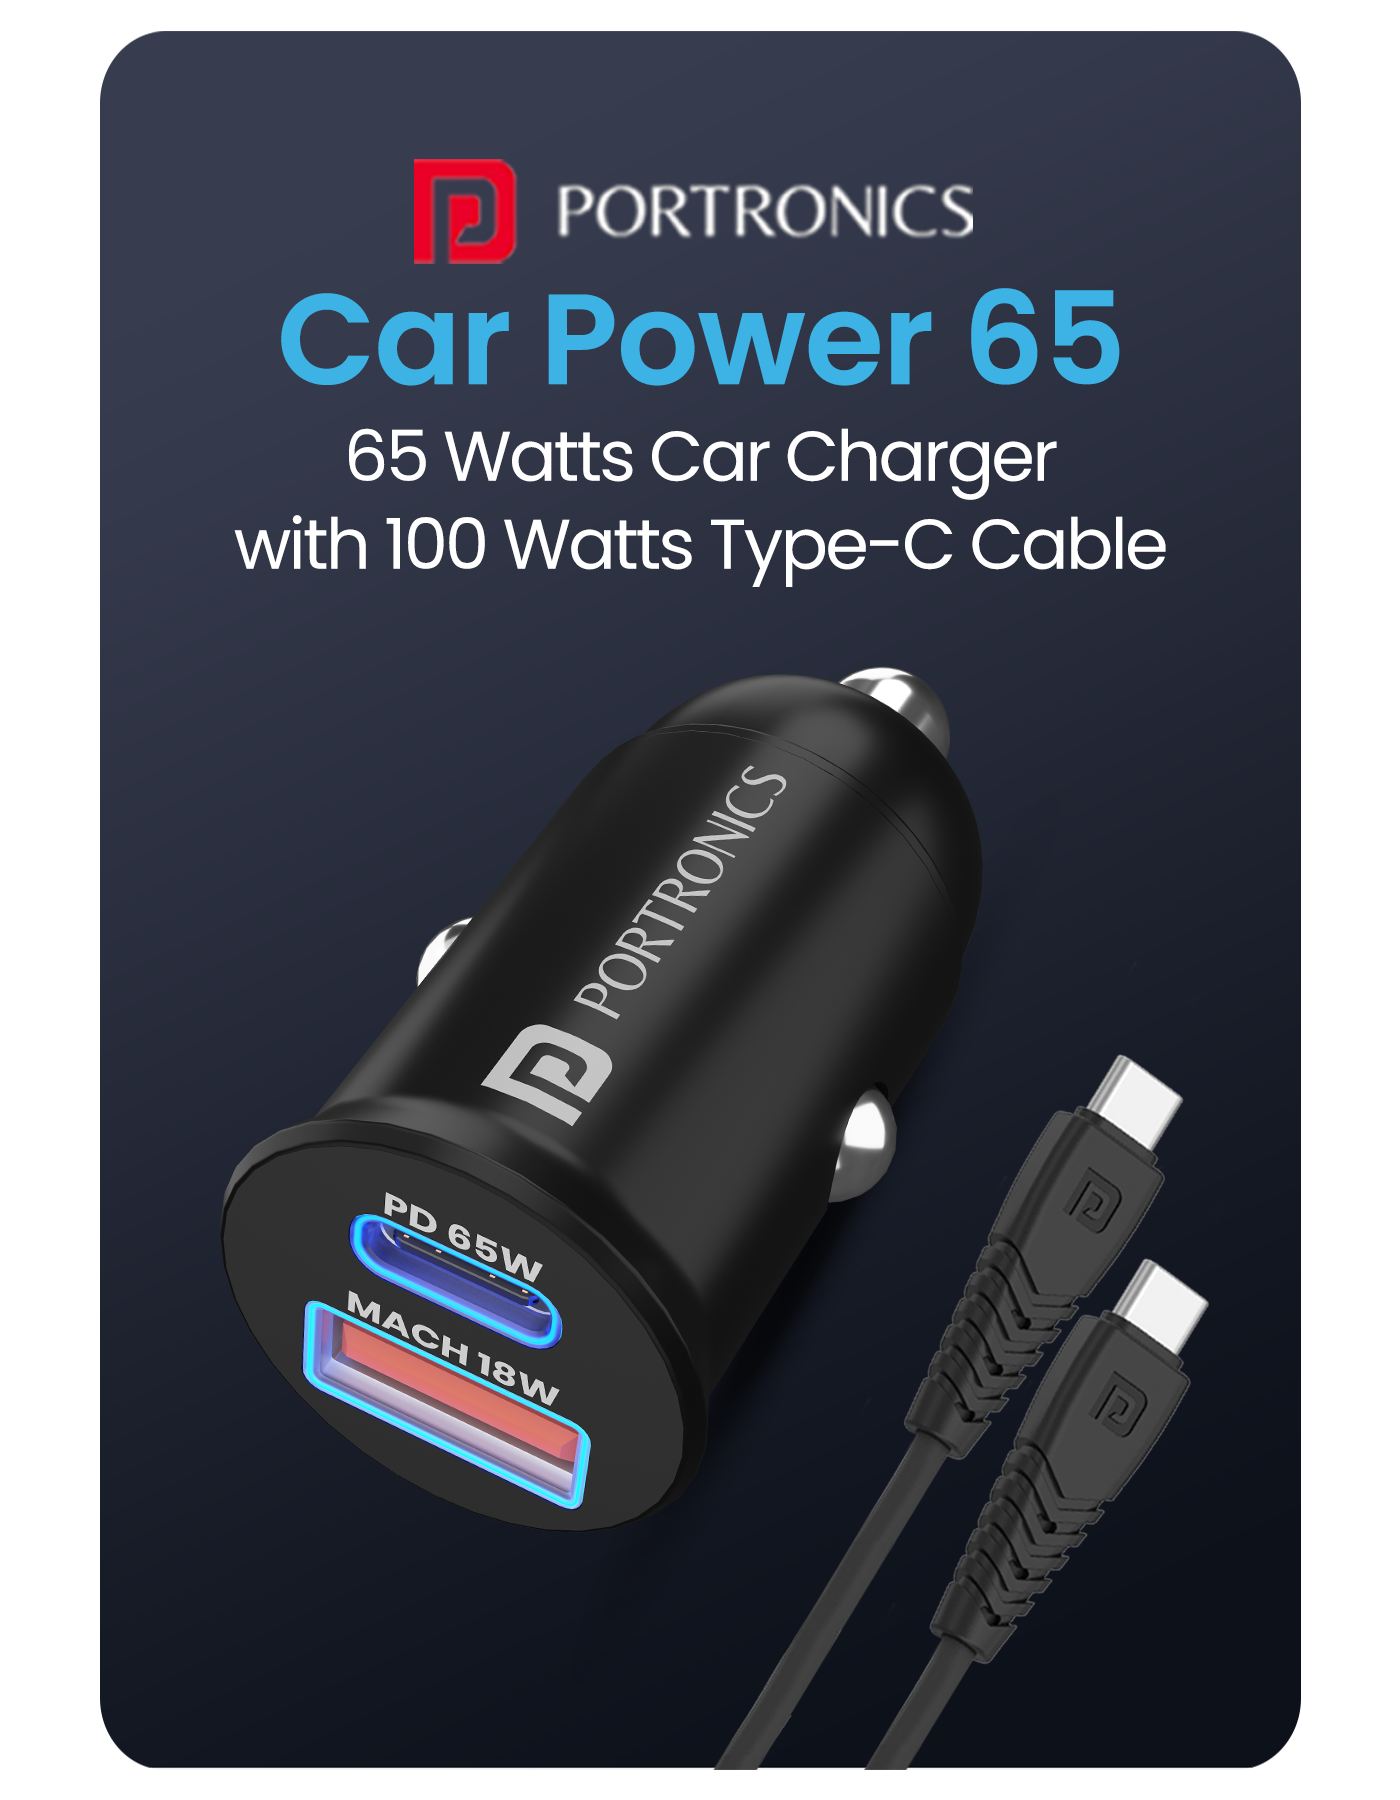 Portronics Car Power 65 best car charger best car accessories| 65w pd car charging hub with 20W fast charging